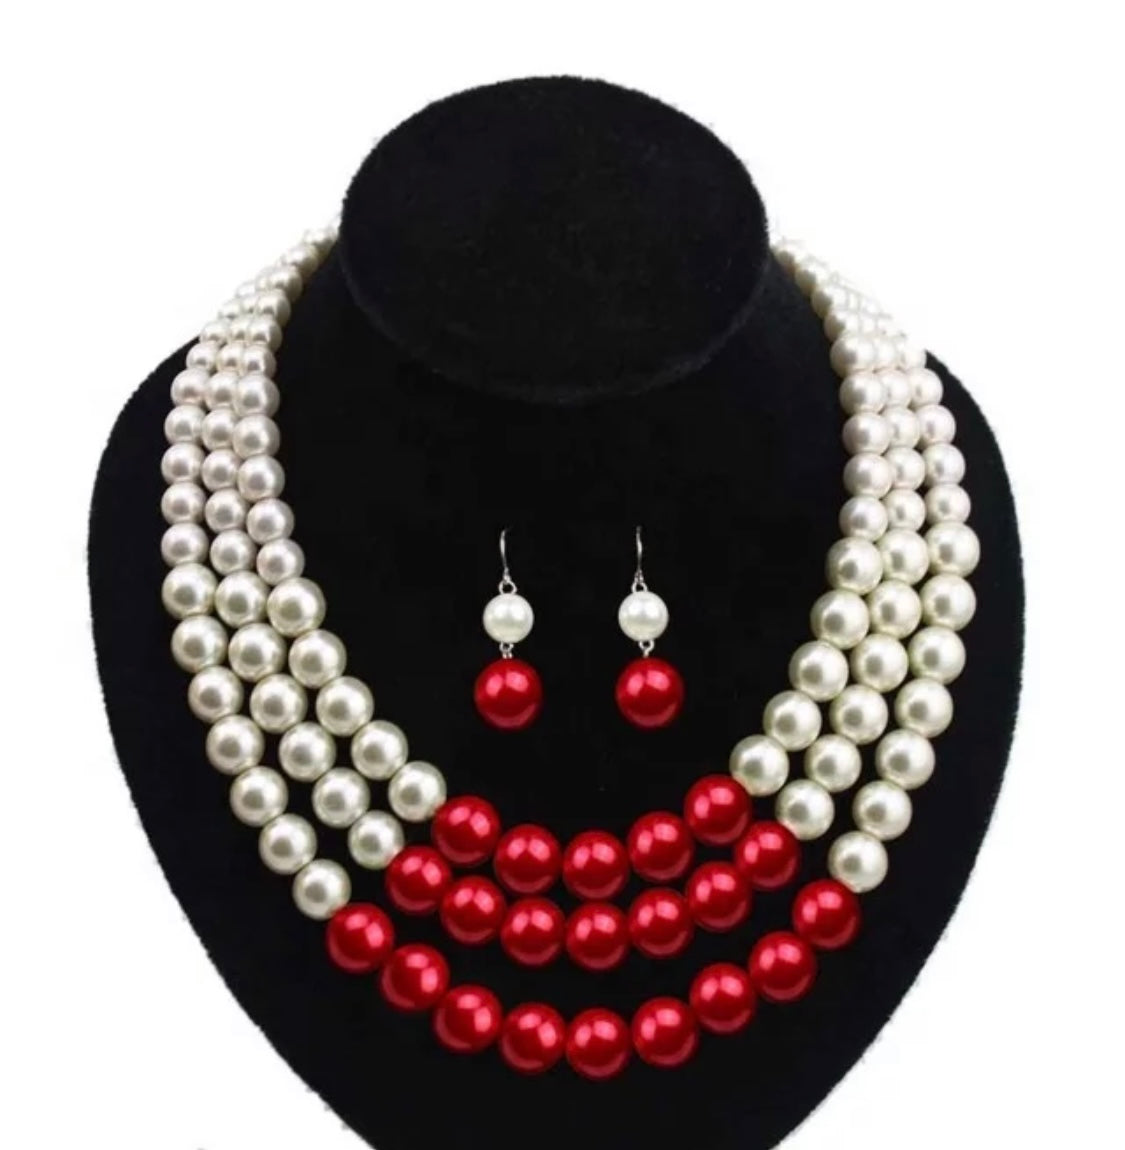 DST, Delta Sigma Theta, Crimson and Cream Triple Pearl Necklace with Earrings with Keepsake Pouch